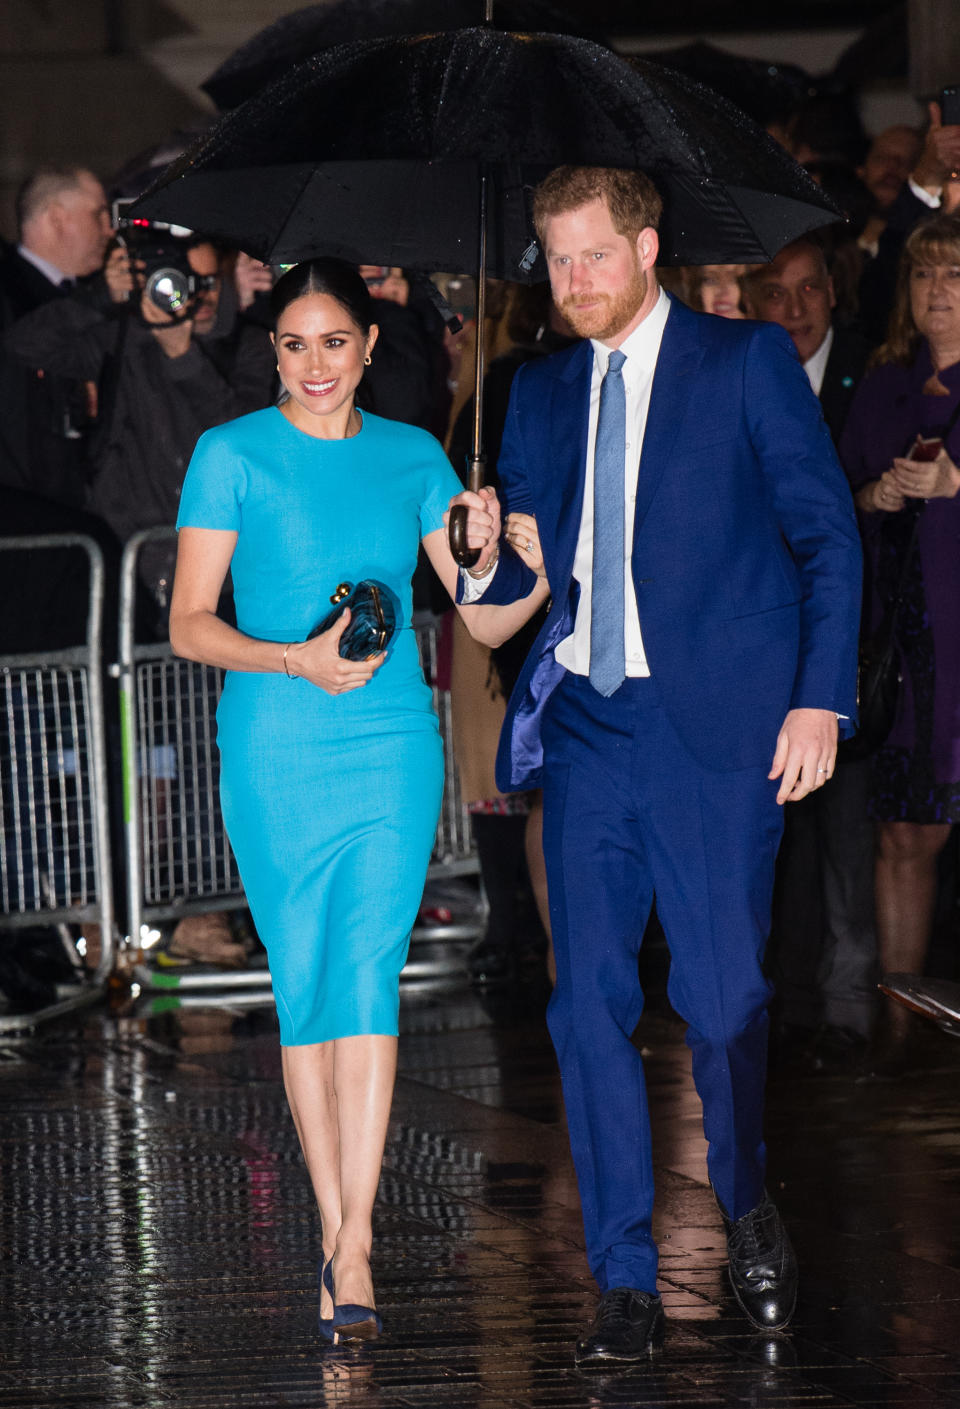 LONDON, ENGLAND - MARCH 05: Prince Harry, Duke of Sussex and Meghan, Duchess of Sussex attend The Endeavour Fund Awards at Mansion House on March 05, 2020 in London, England. (Photo by Samir Hussein/WireImage)